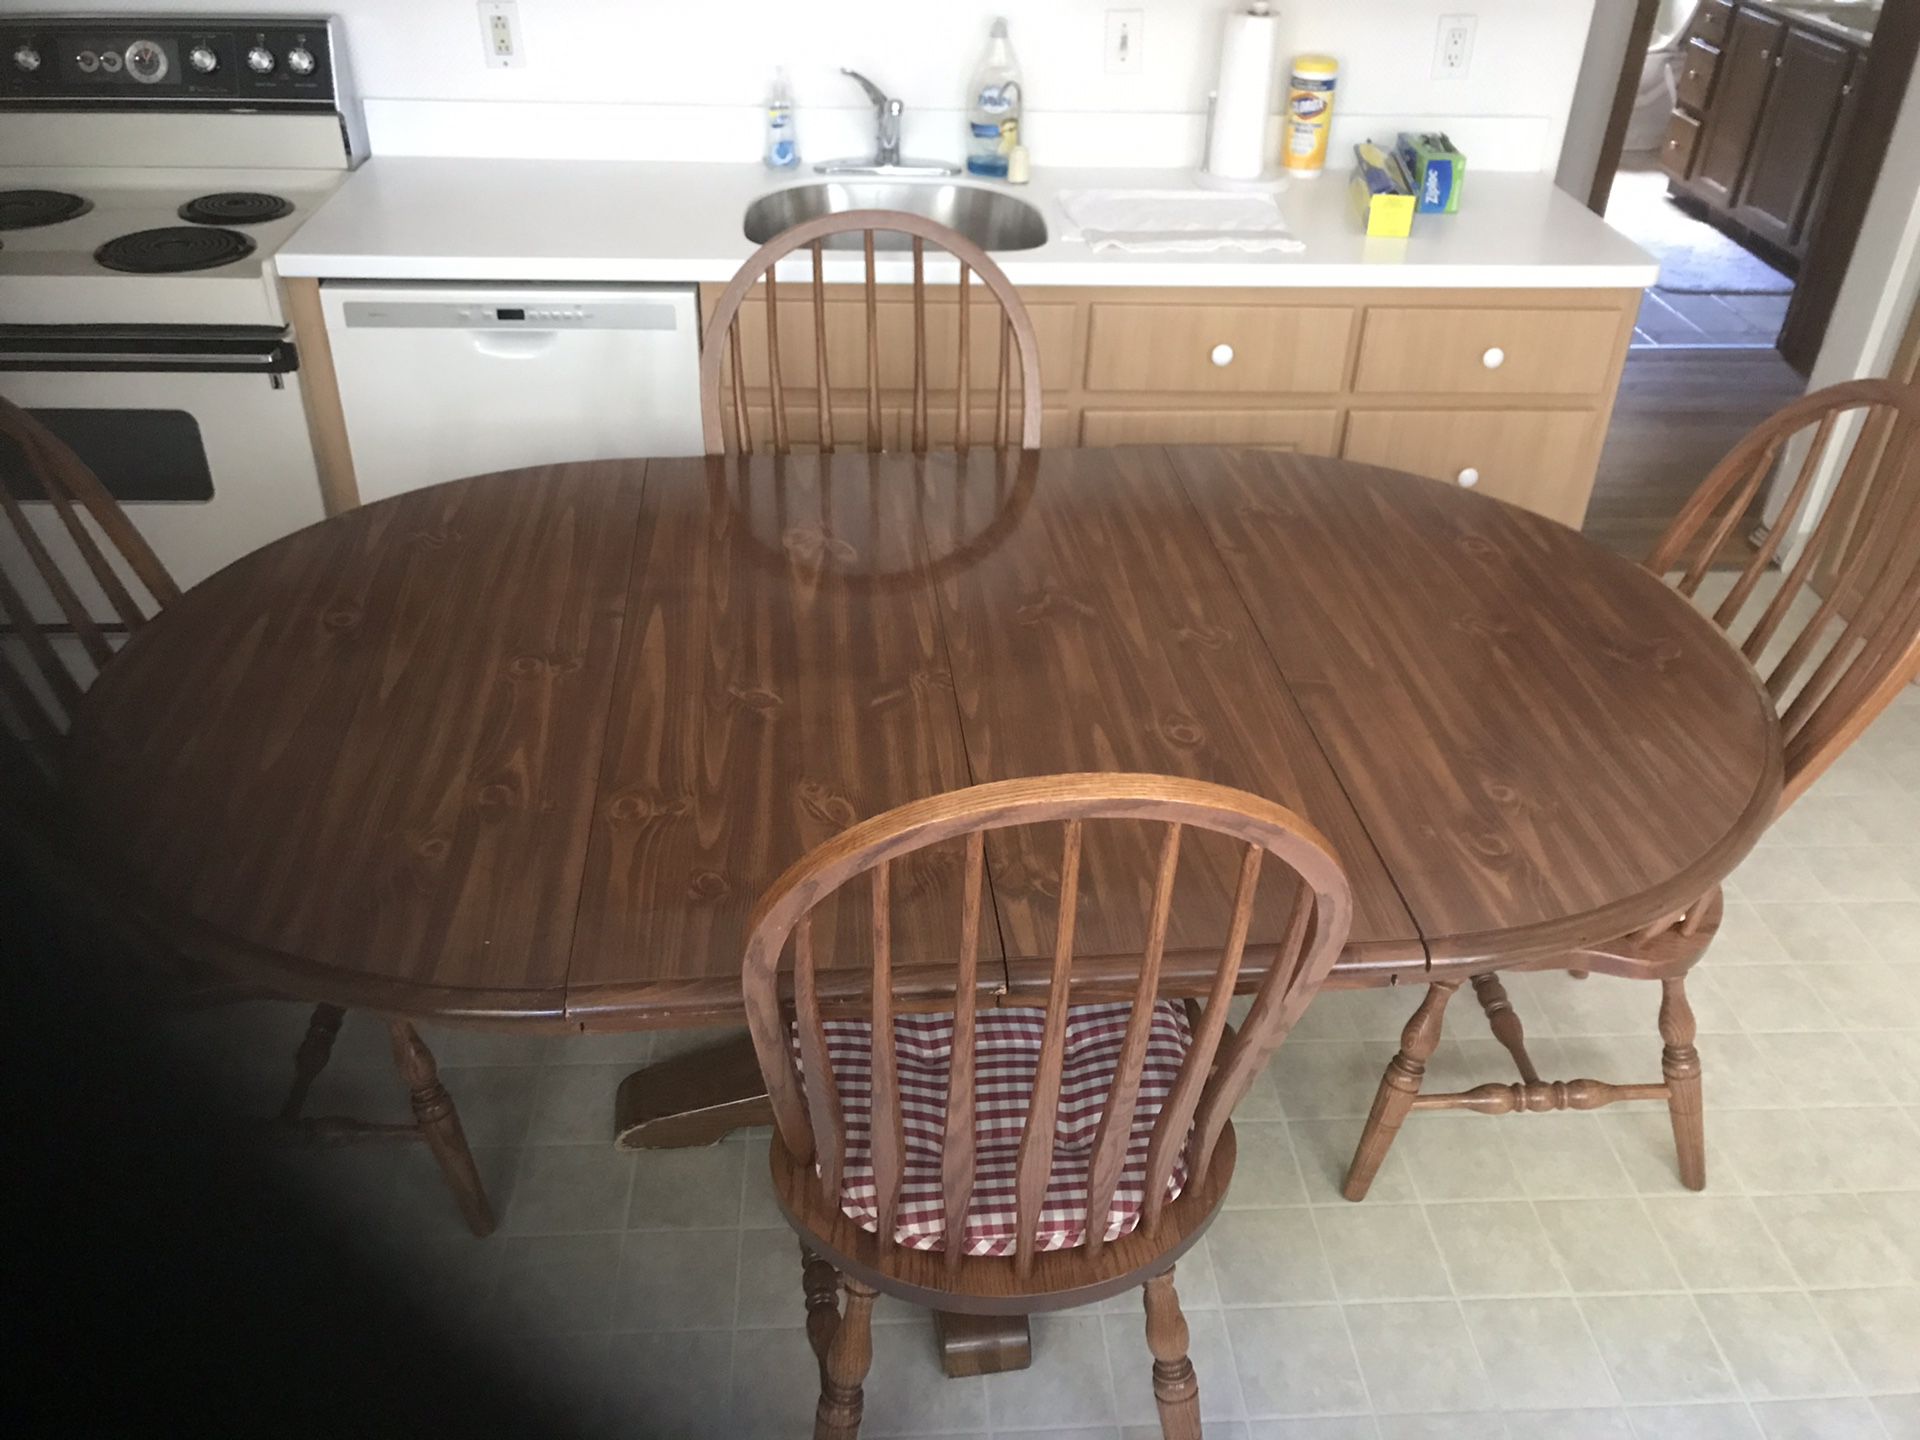 Kitchen table + chairs.